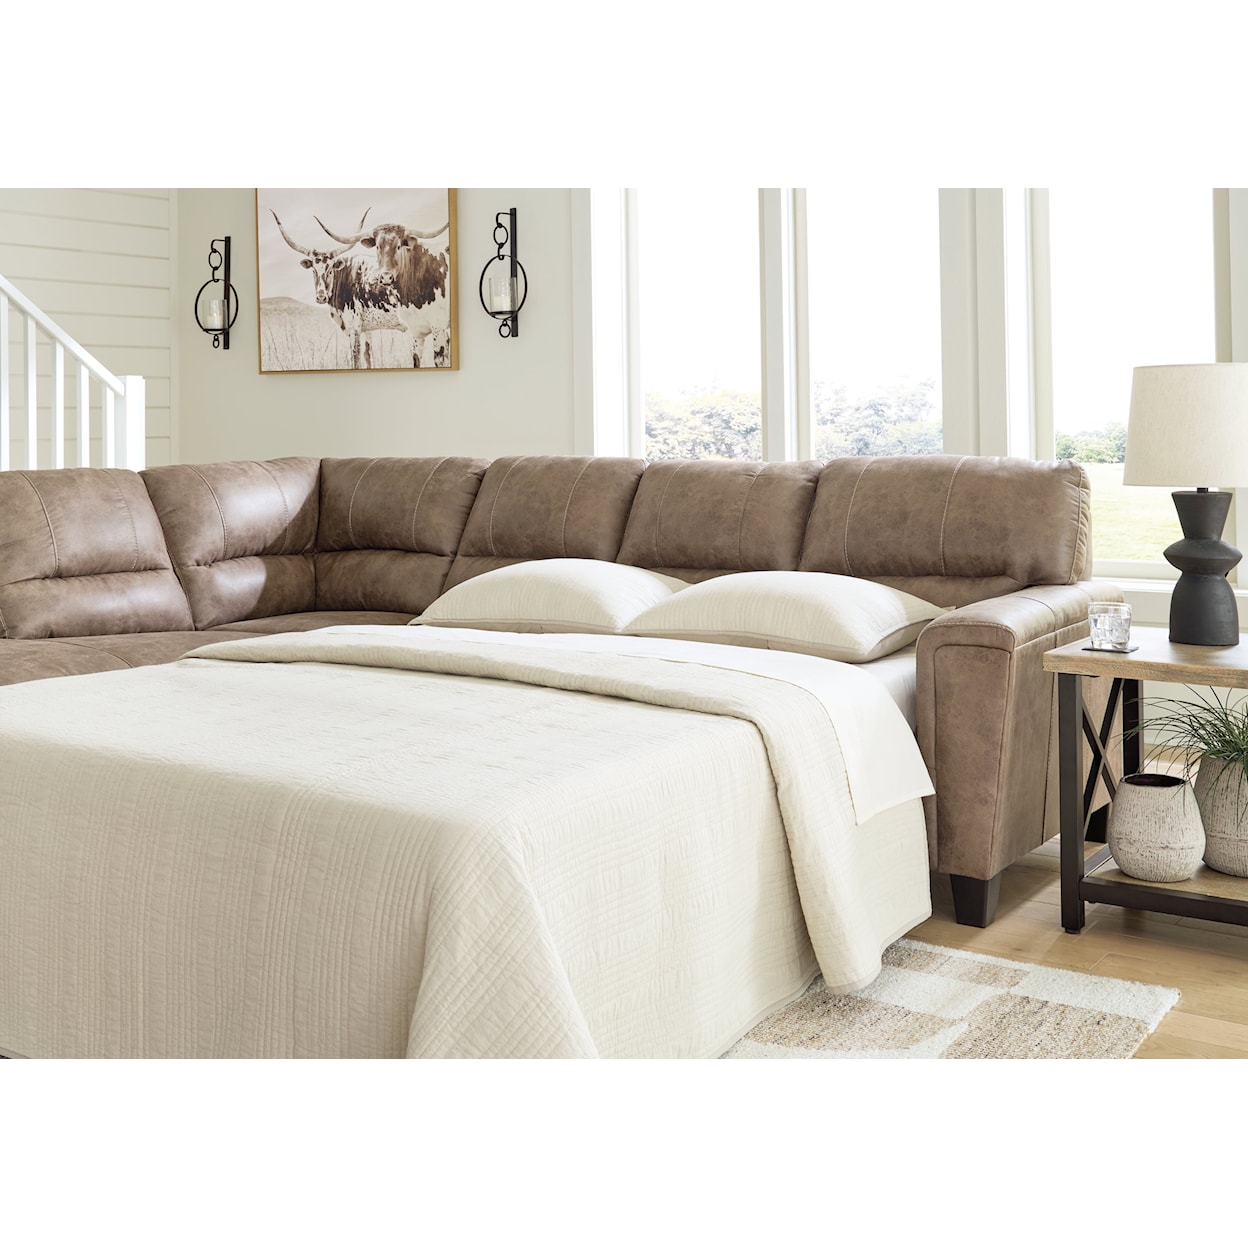 Ashley Furniture Signature Design Navi 2-Piece Sectional w/ Sleeper and Chaise